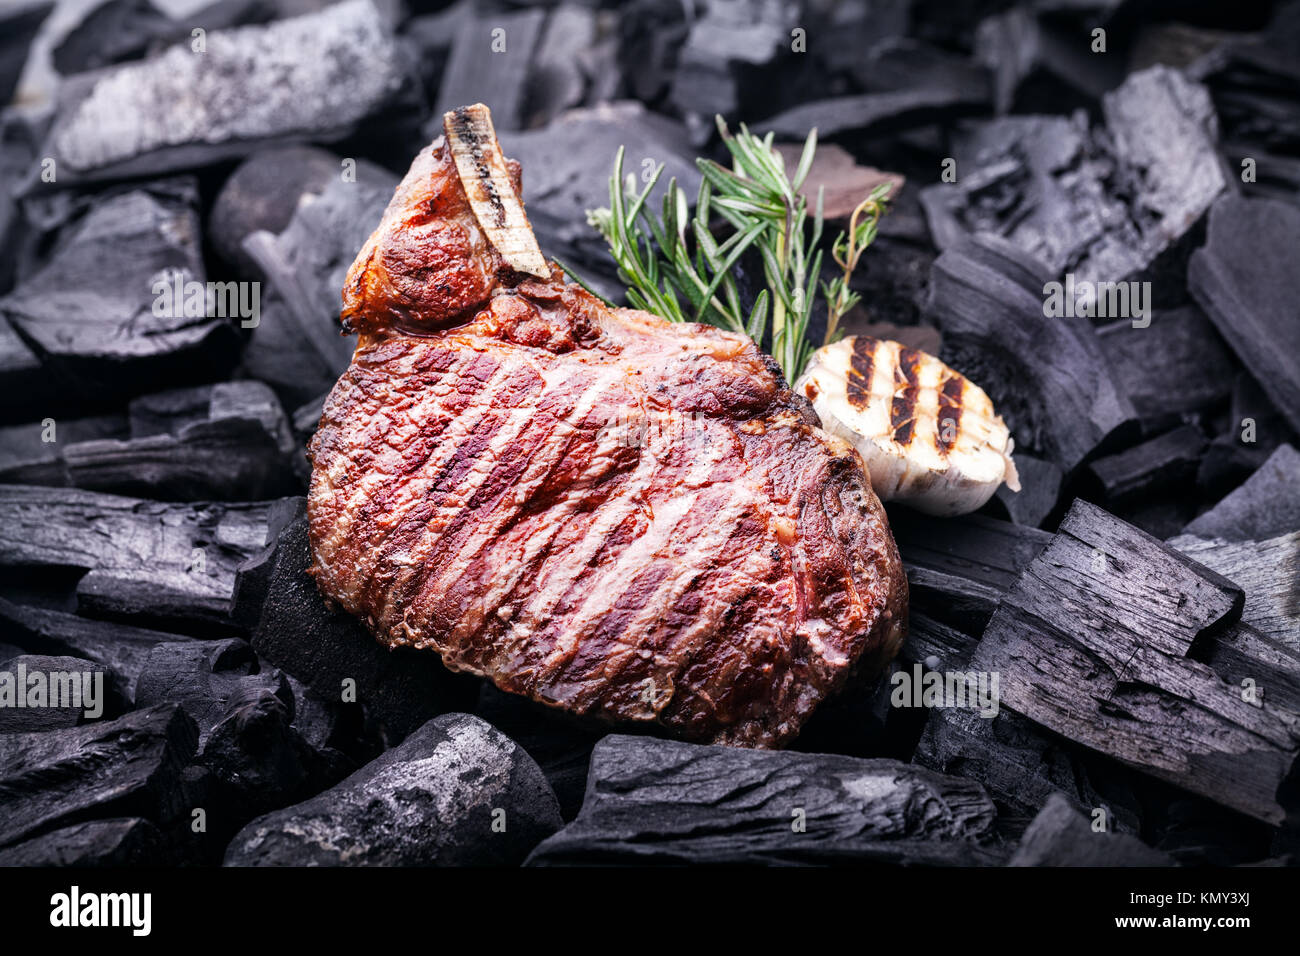 Grilled meat steak with garlic and rosemary on black coals at barbeque cookout Stock Photo